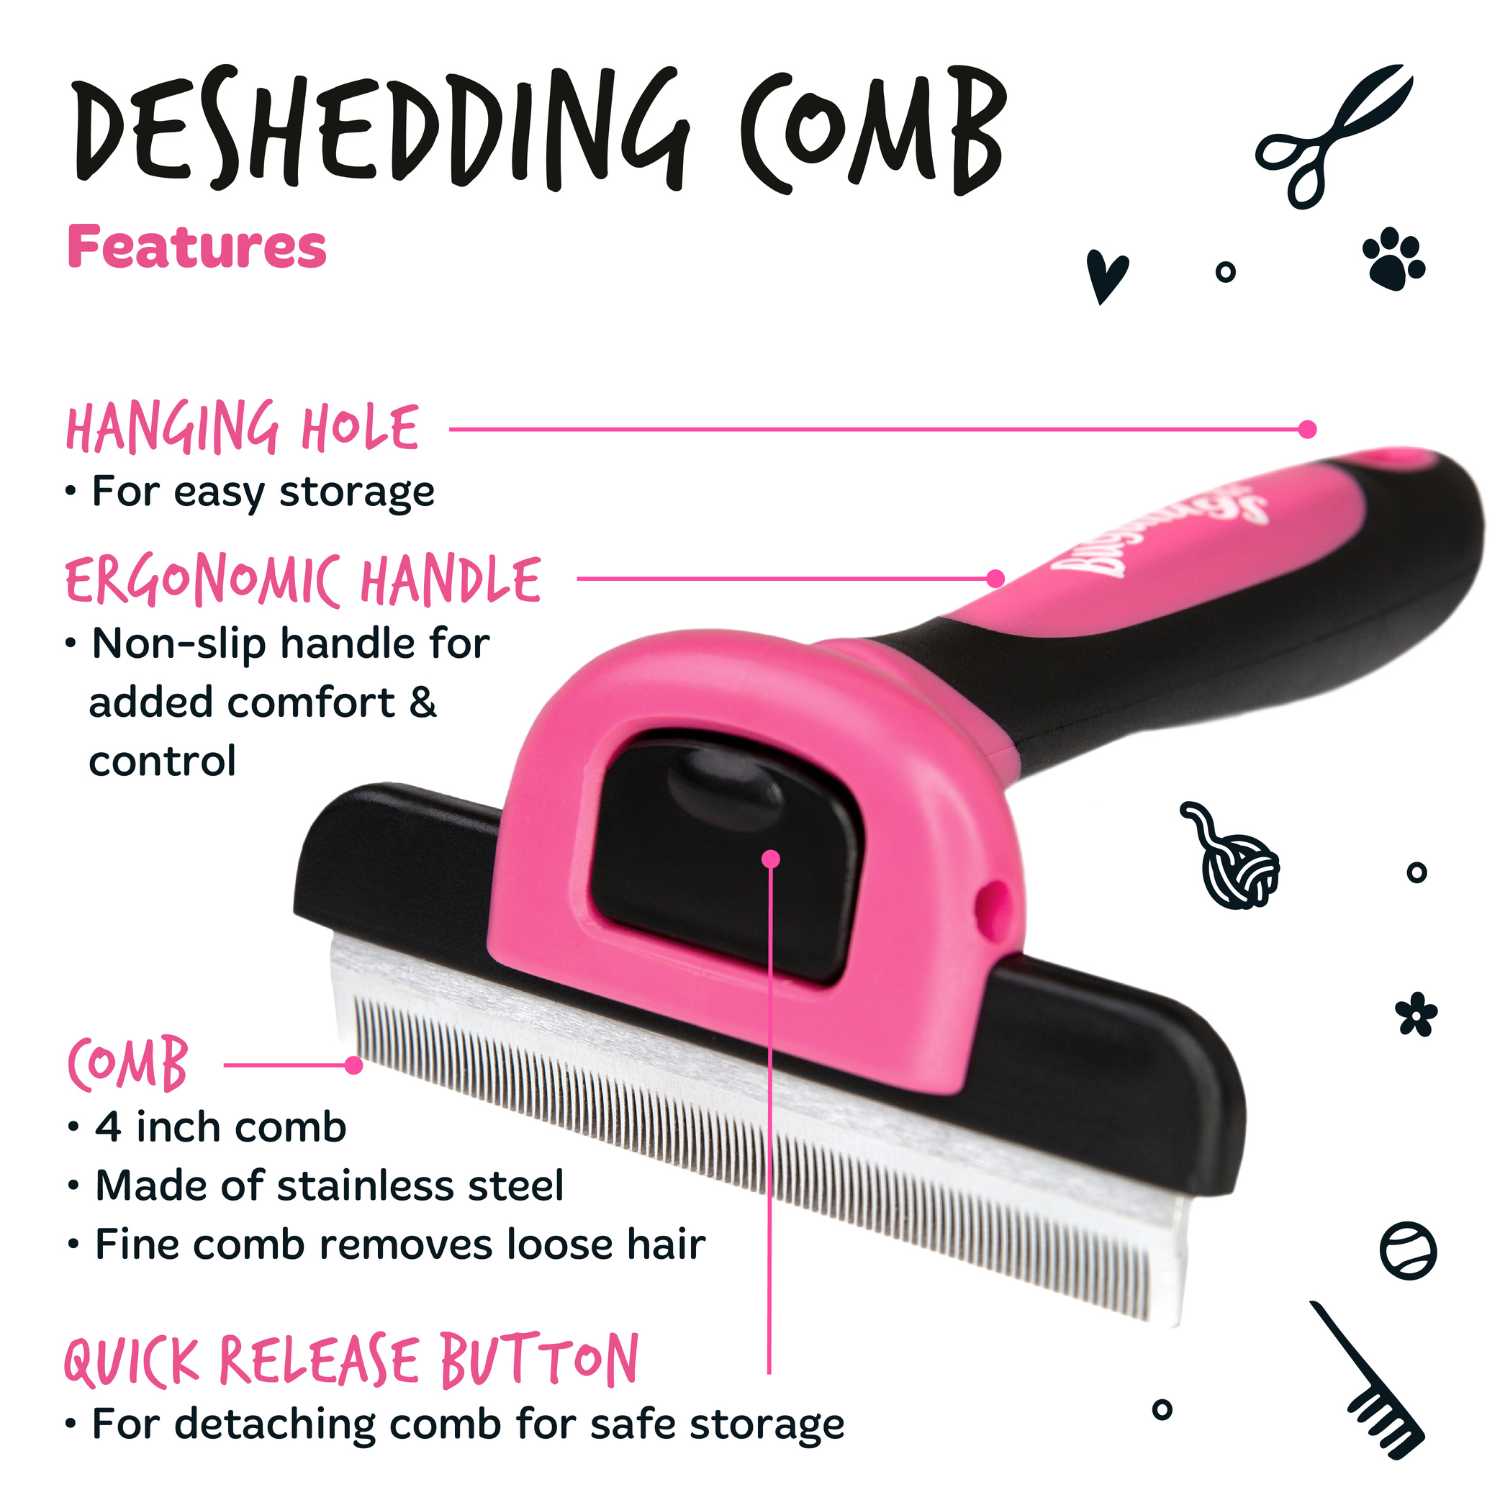 Bugalugs Deshedding Comb - Key features - Hanging hole, ergonomic handle, comb, quick release button